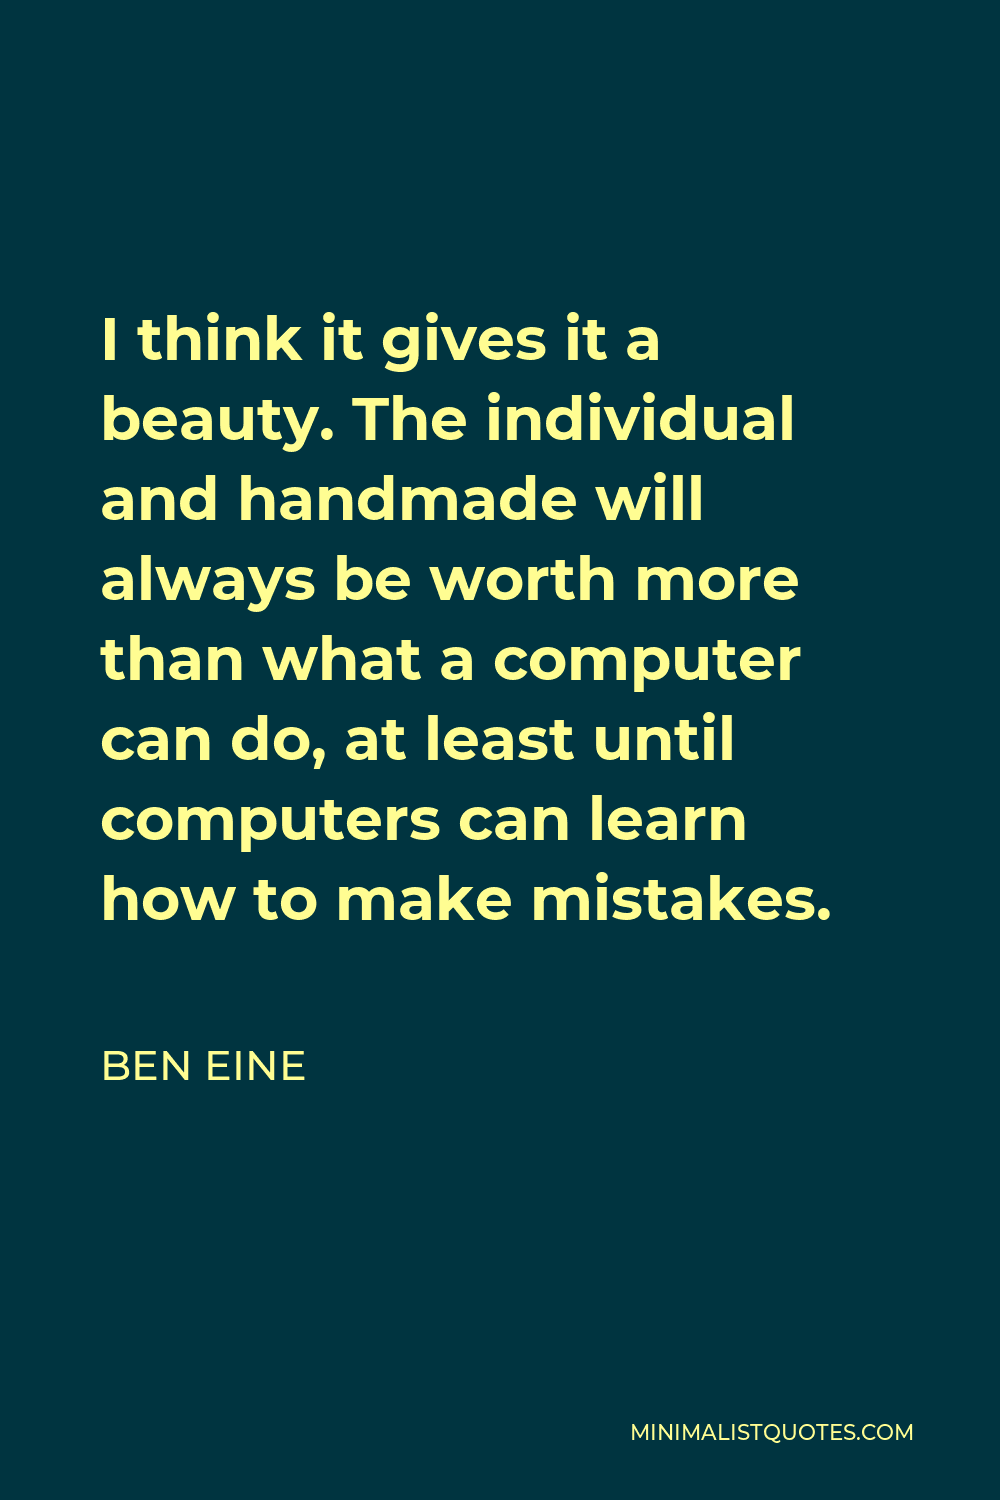 Ben Eine Quote - I think it gives it a beauty. The individual and handmade will always be worth more than what a computer can do, at least until computers can learn how to make mistakes.